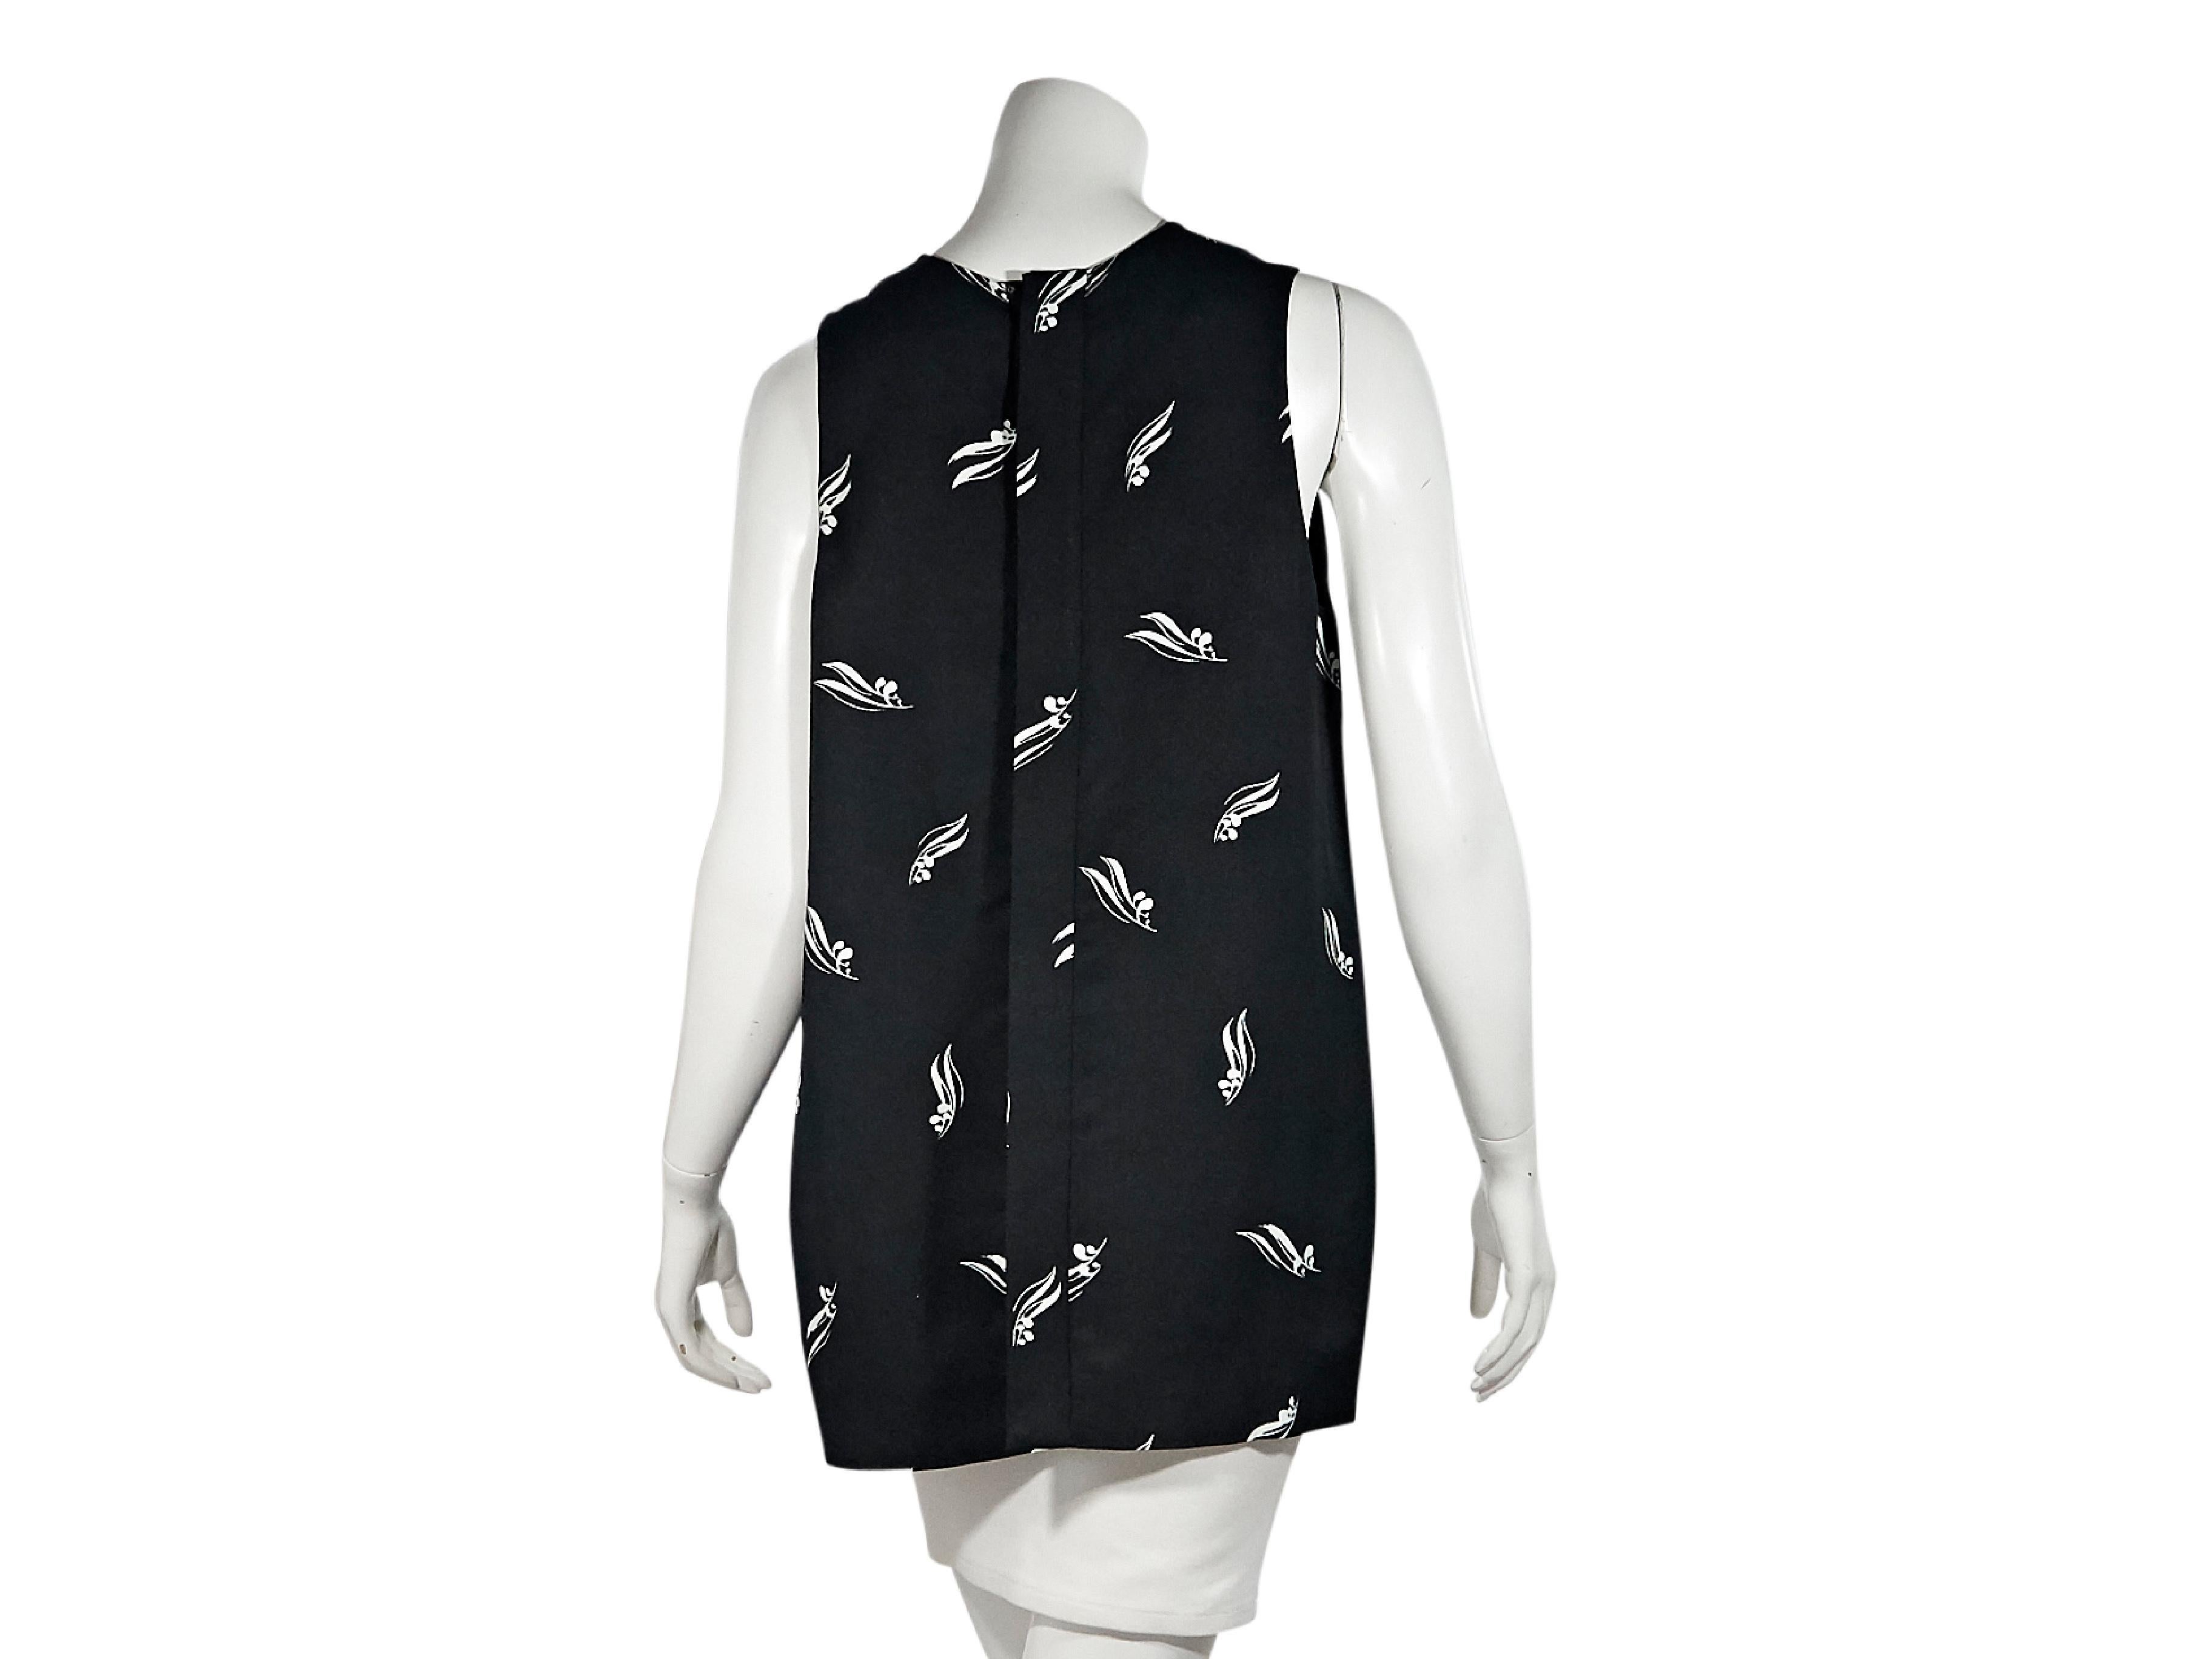 Product details:  Black and white printed long top by Marni.  Scoopneck.  Sleeveless.  Concealed back snap closure.  40